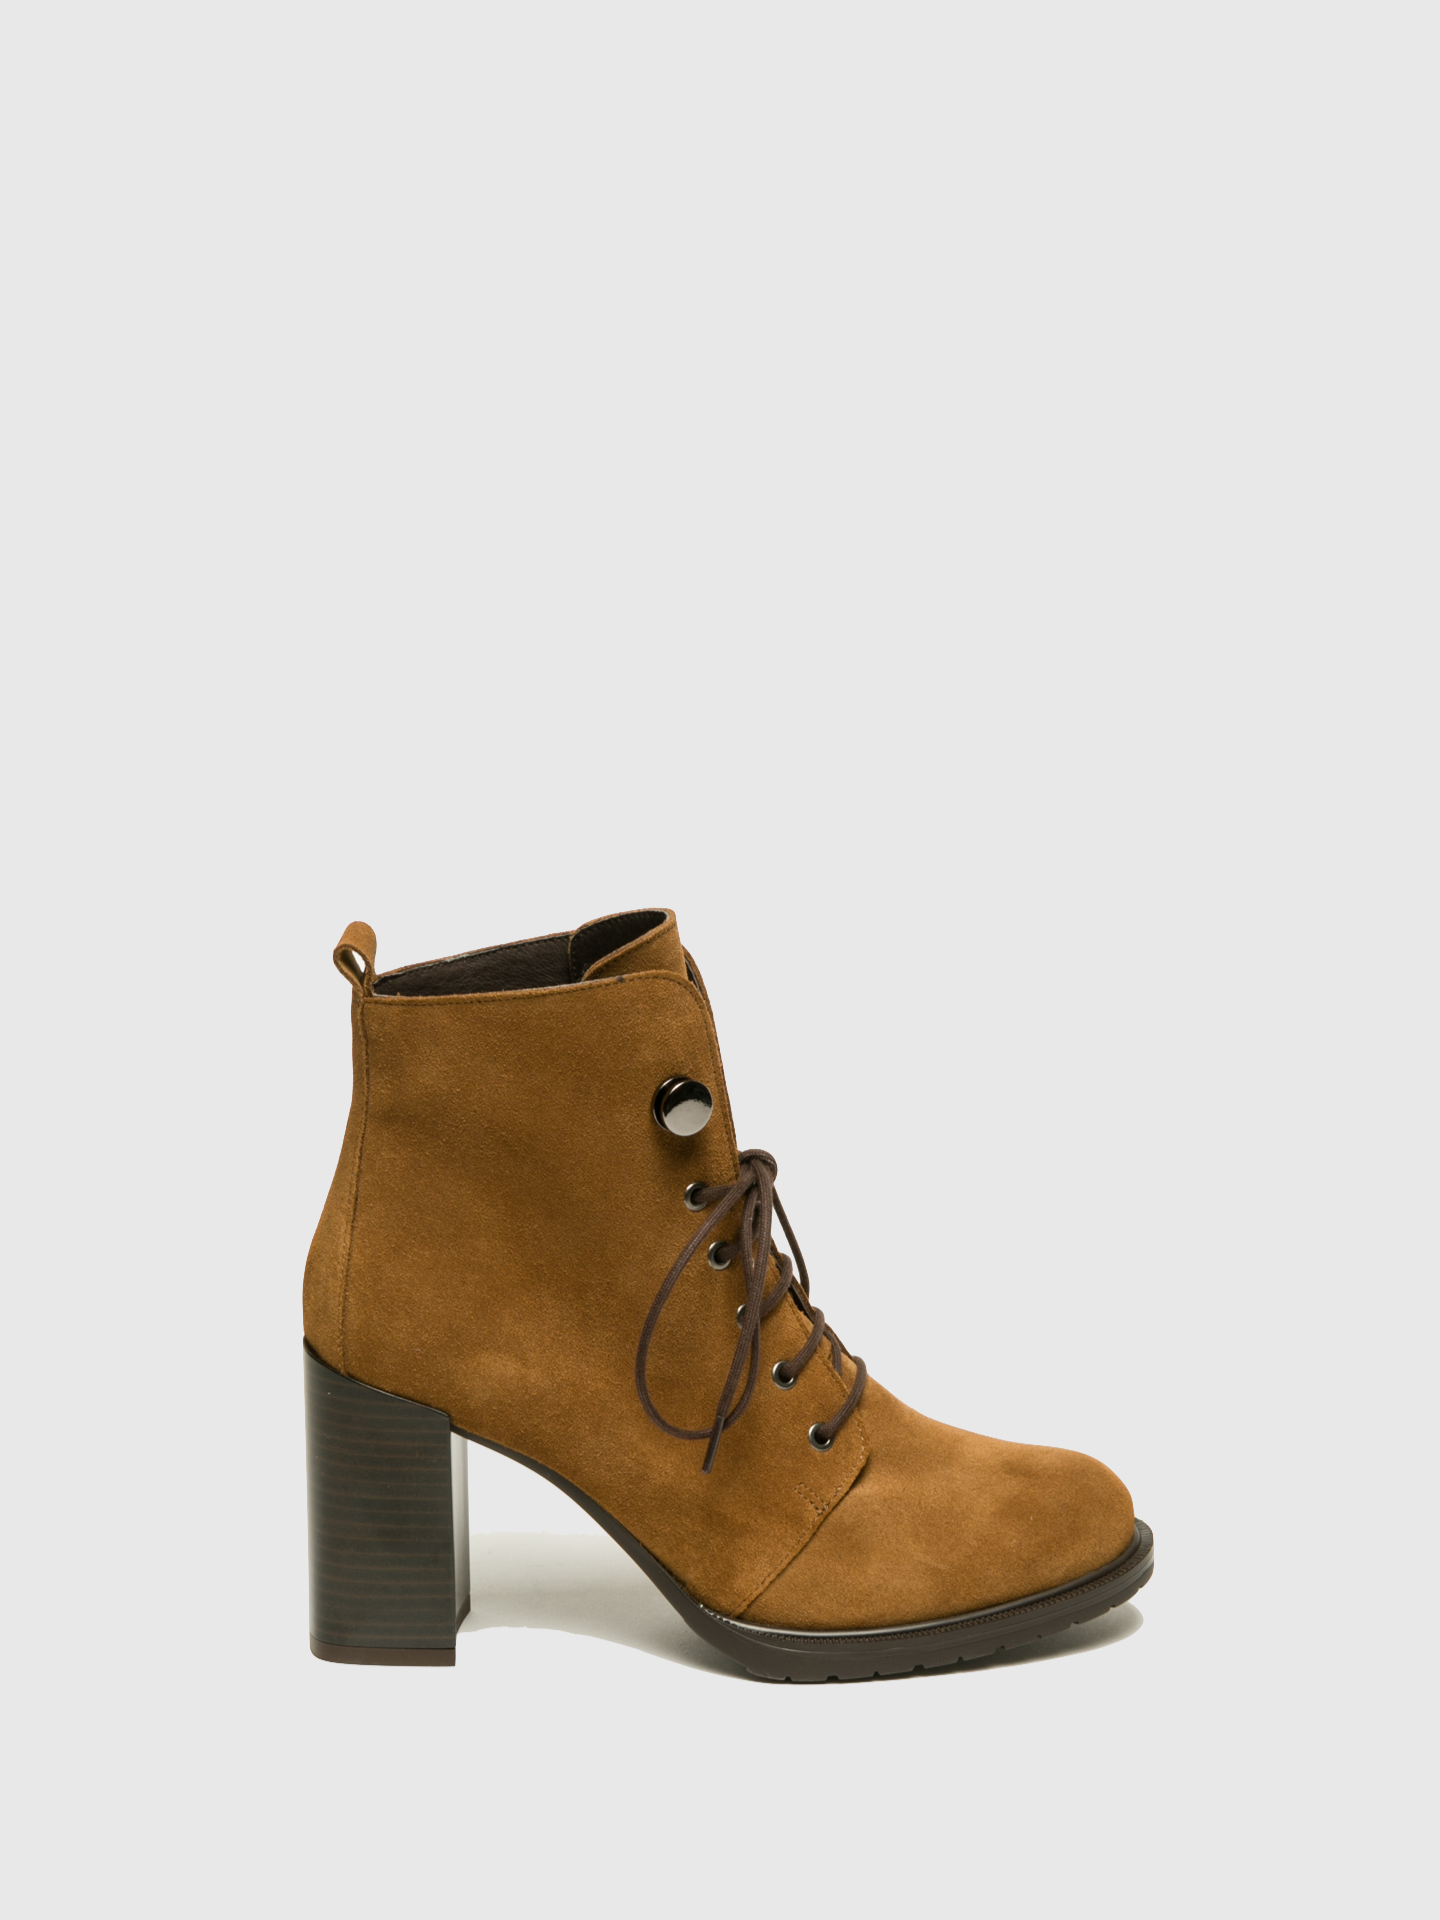 Clay's Peru Lace-up Ankle Boots